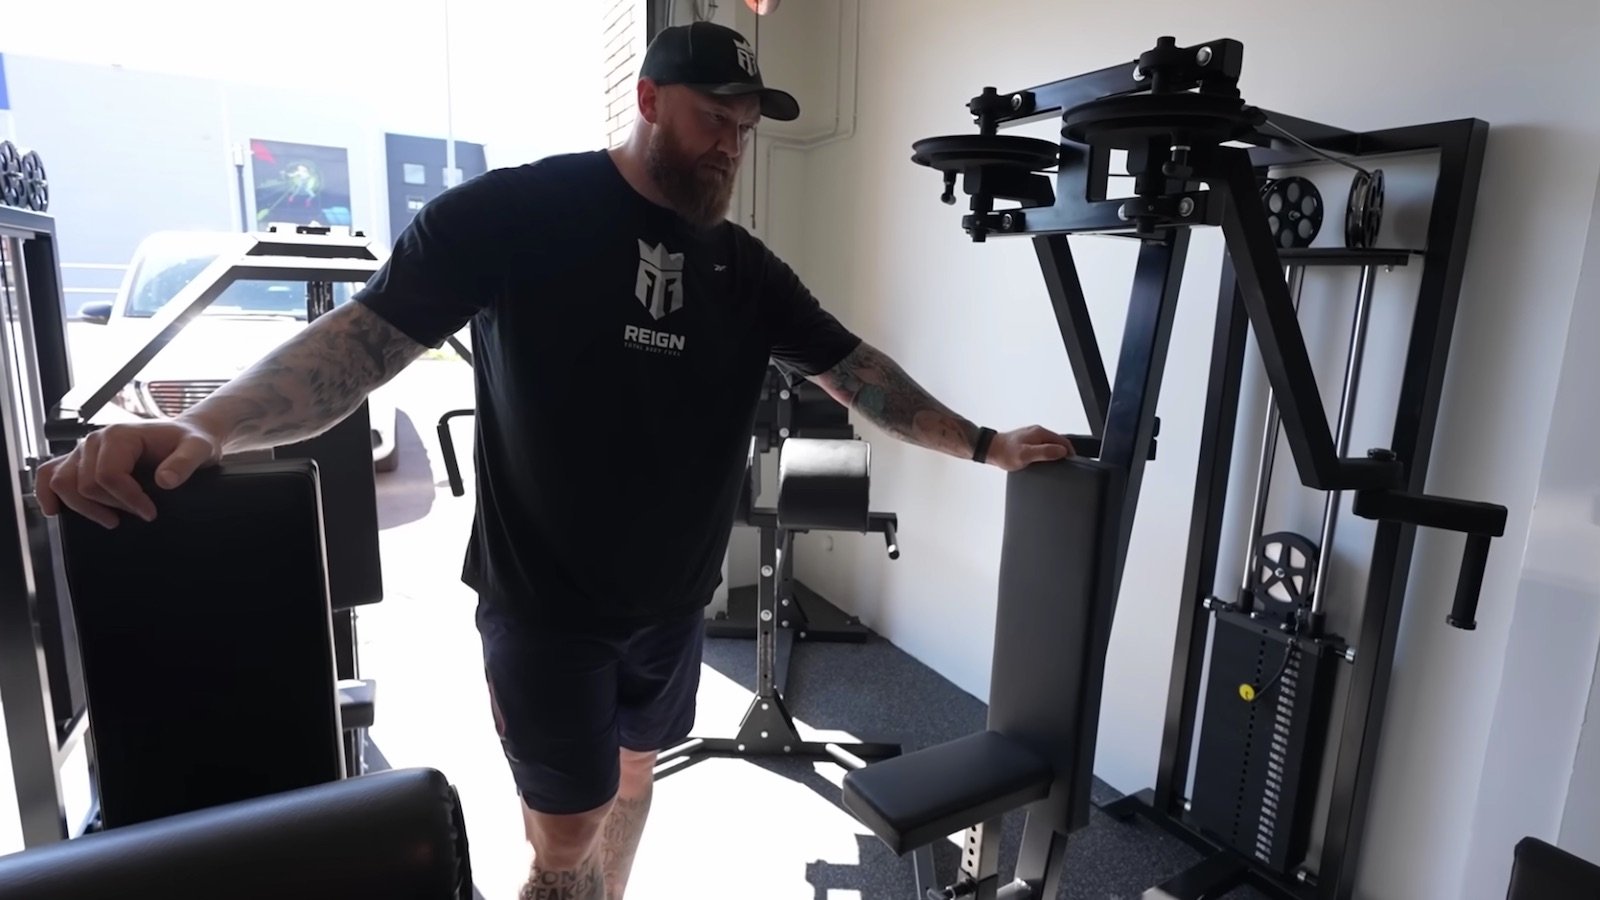 hafthor-bjornsson-reveals-gym-expansion-—-$116,000-worth-of-machines-and-equipment-–-breaking-muscle